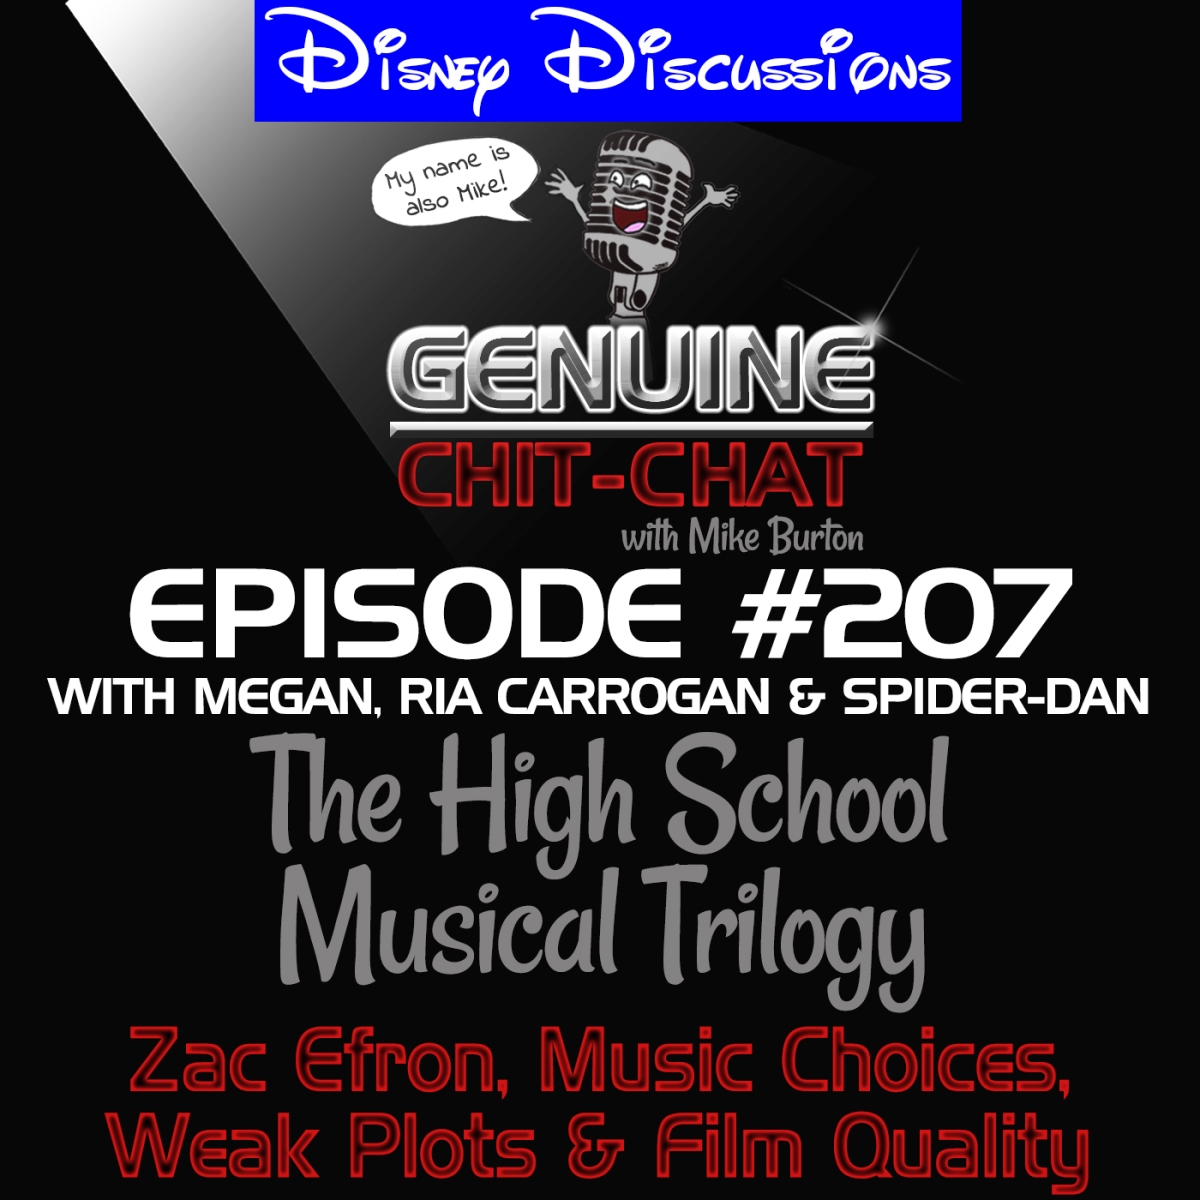 #207 – The High School Musical Trilogy: Disney Discussions 9; Zac Efron, Music Choices, Weak Plots & Film Quality With Ria, Spider-Dan and Megan